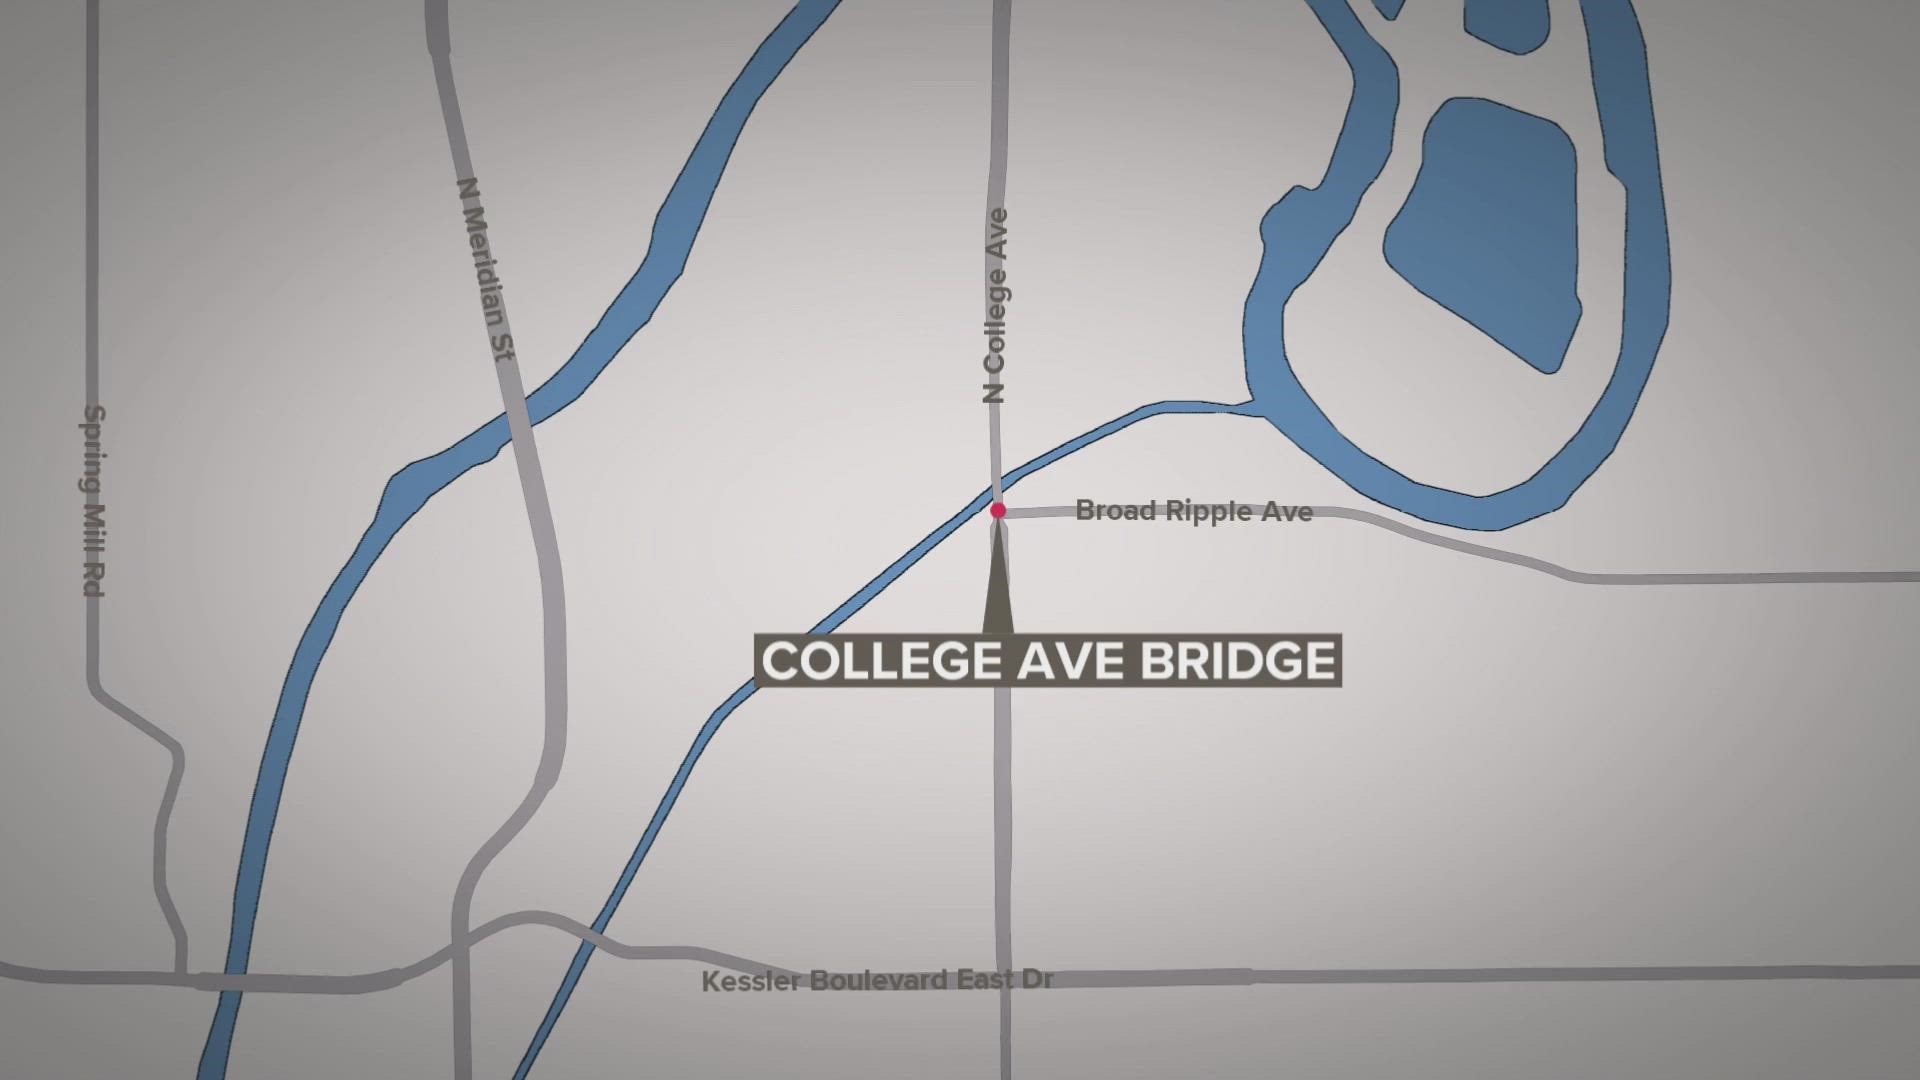 A DPW project will completely close a portion of College Avenue over the Central Canal north of Broad Ripple Avenue into the fall.